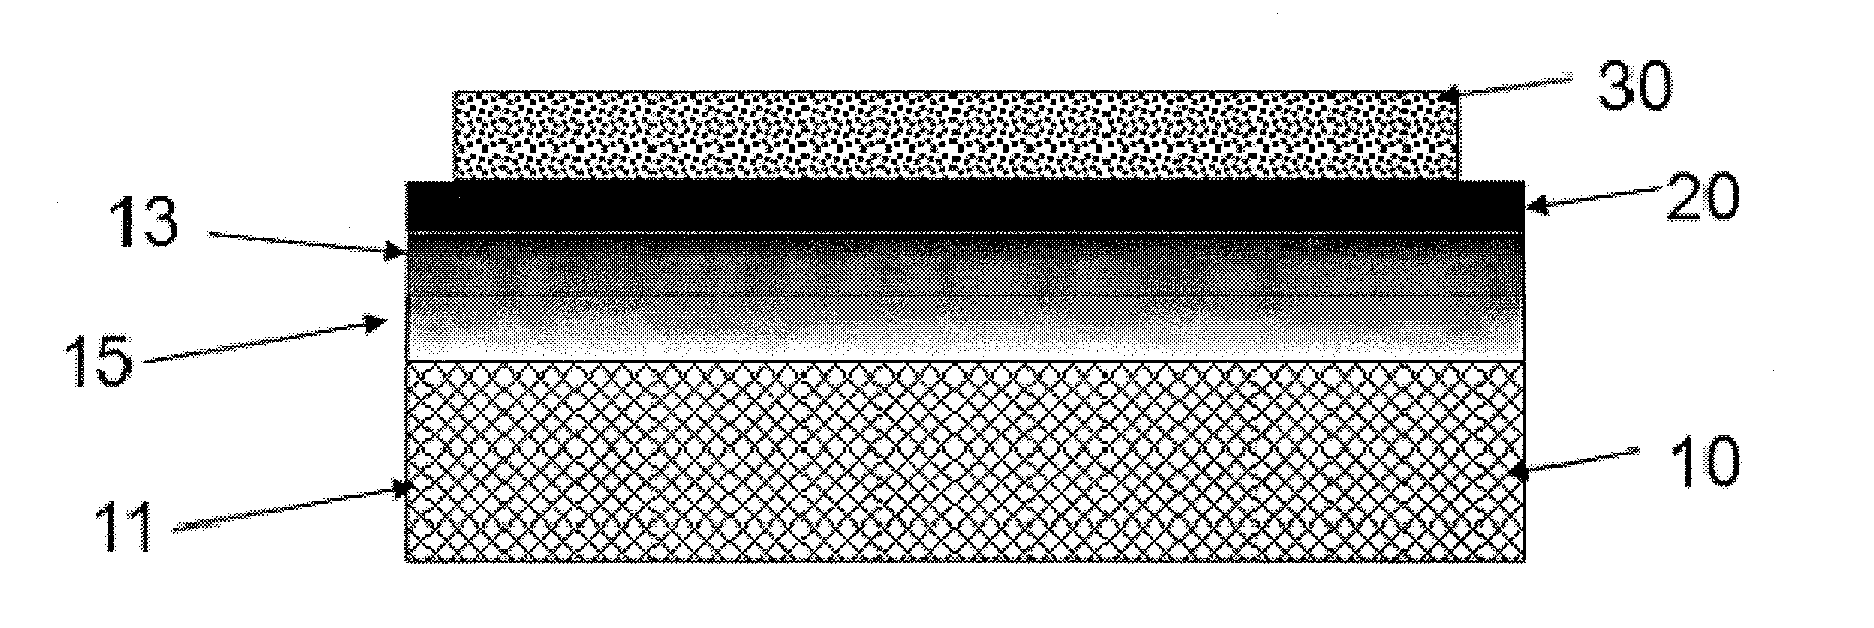 Anode-supported solid oxide fuel cell comprising a nanoporous layer having a pore gradient structure, and a production method therefor